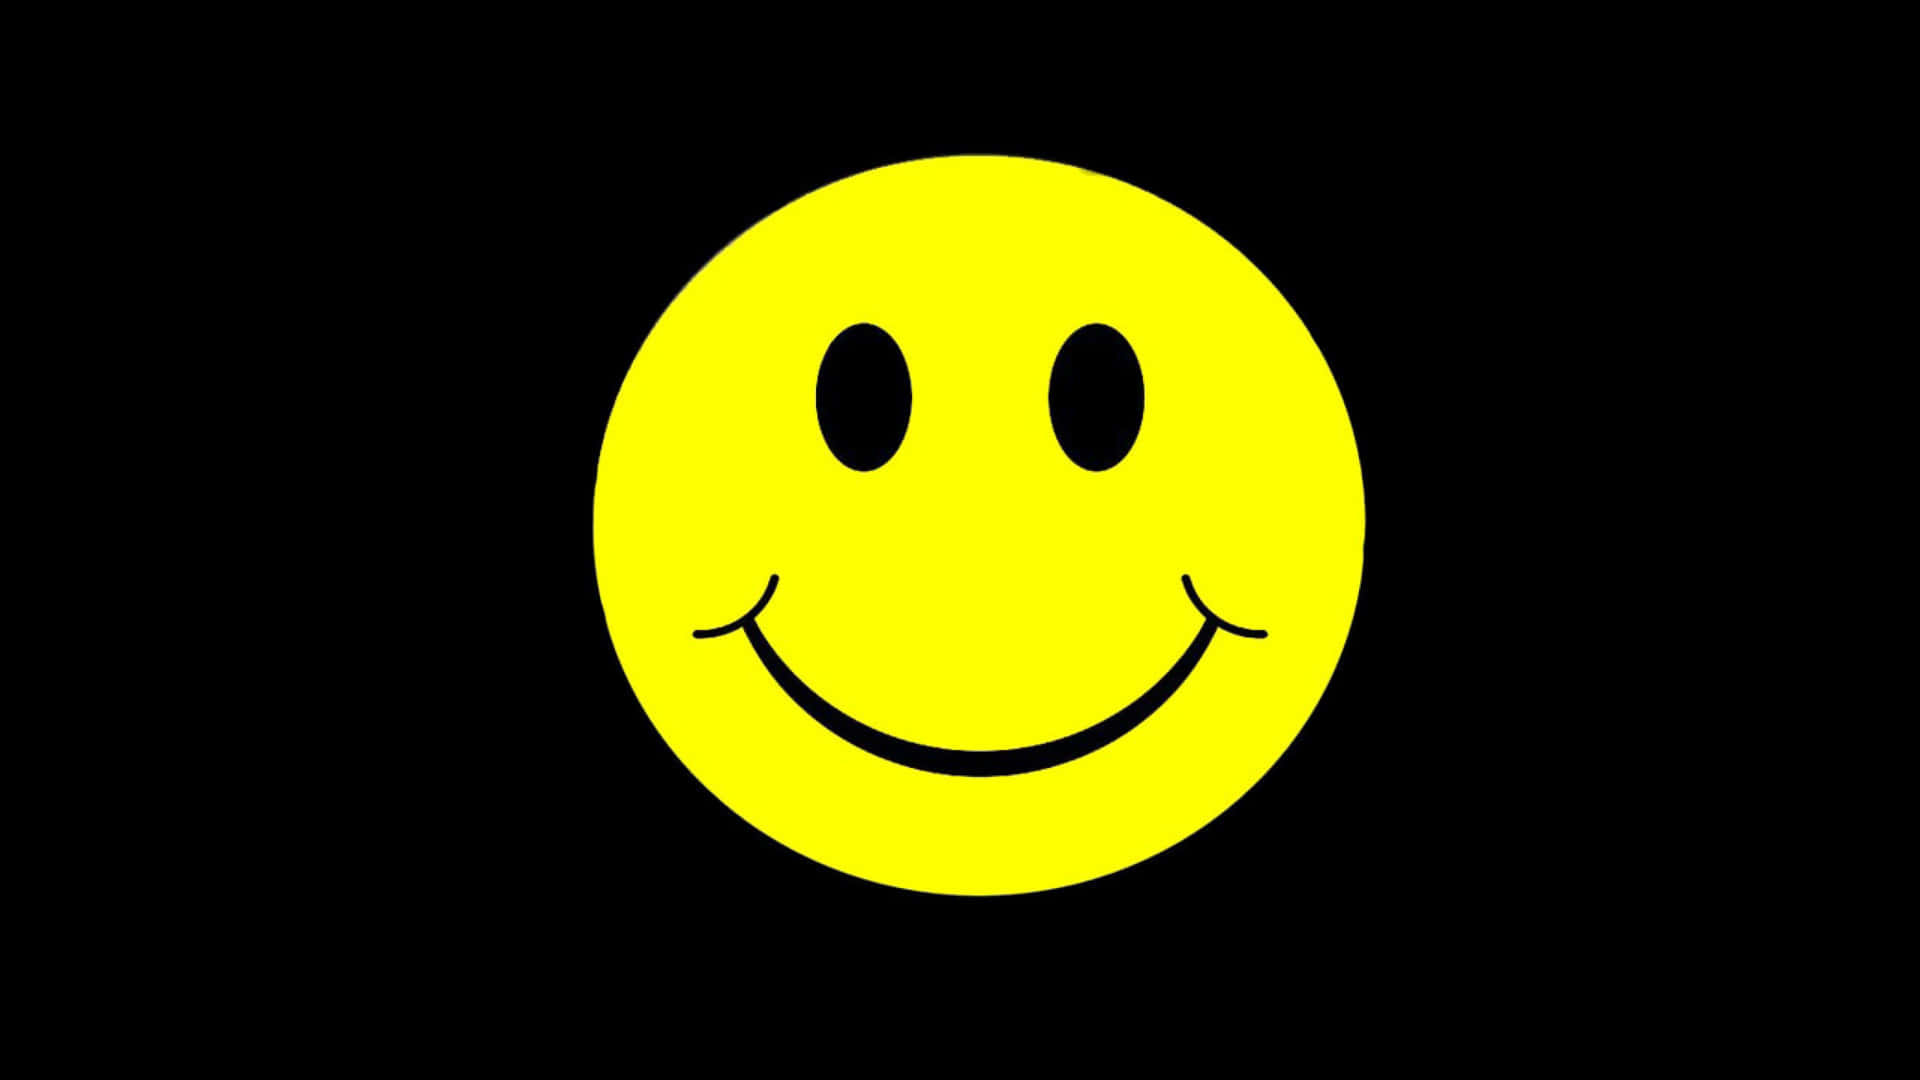 Cute Emoji With Happy Smile Face Background